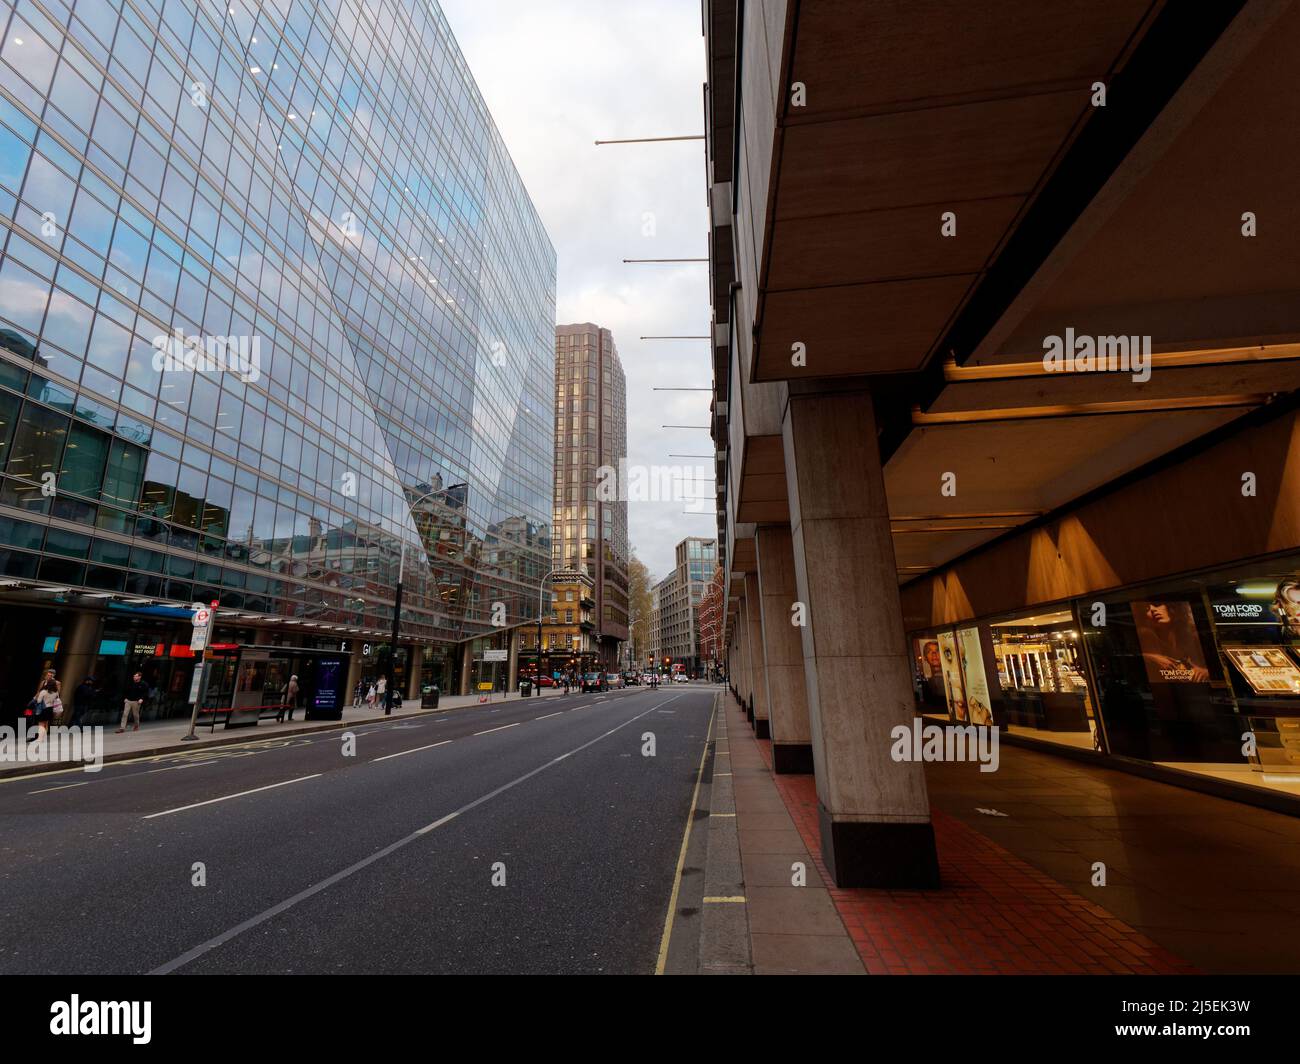 London, Greater London, England, April 13 2022: Victoria Street in Westminster in the evening showing the covered pavement area. Stock Photo